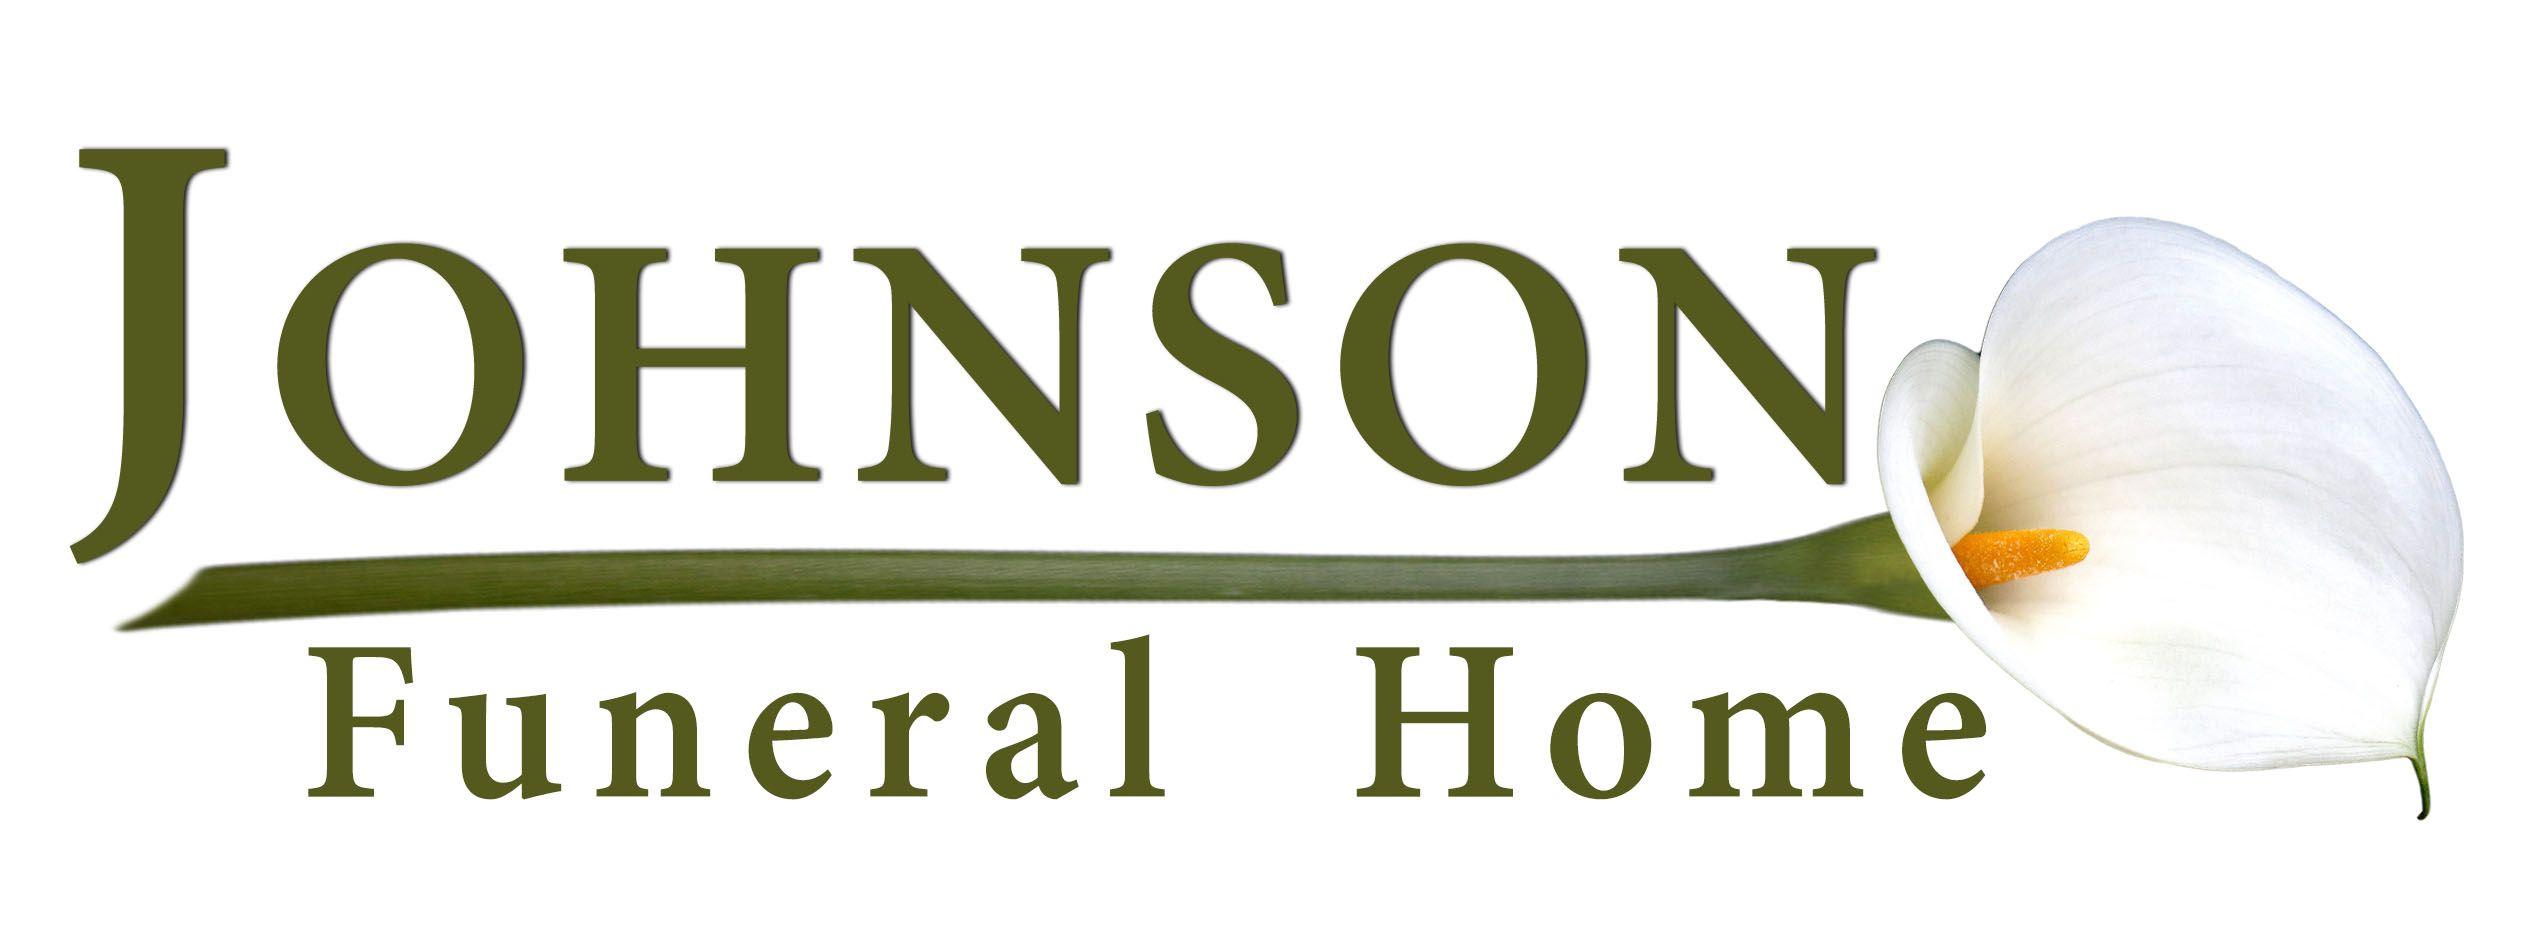 Funeral Home Logo - Johnson Funeral Home I Salem's FAMILY Funeral Home